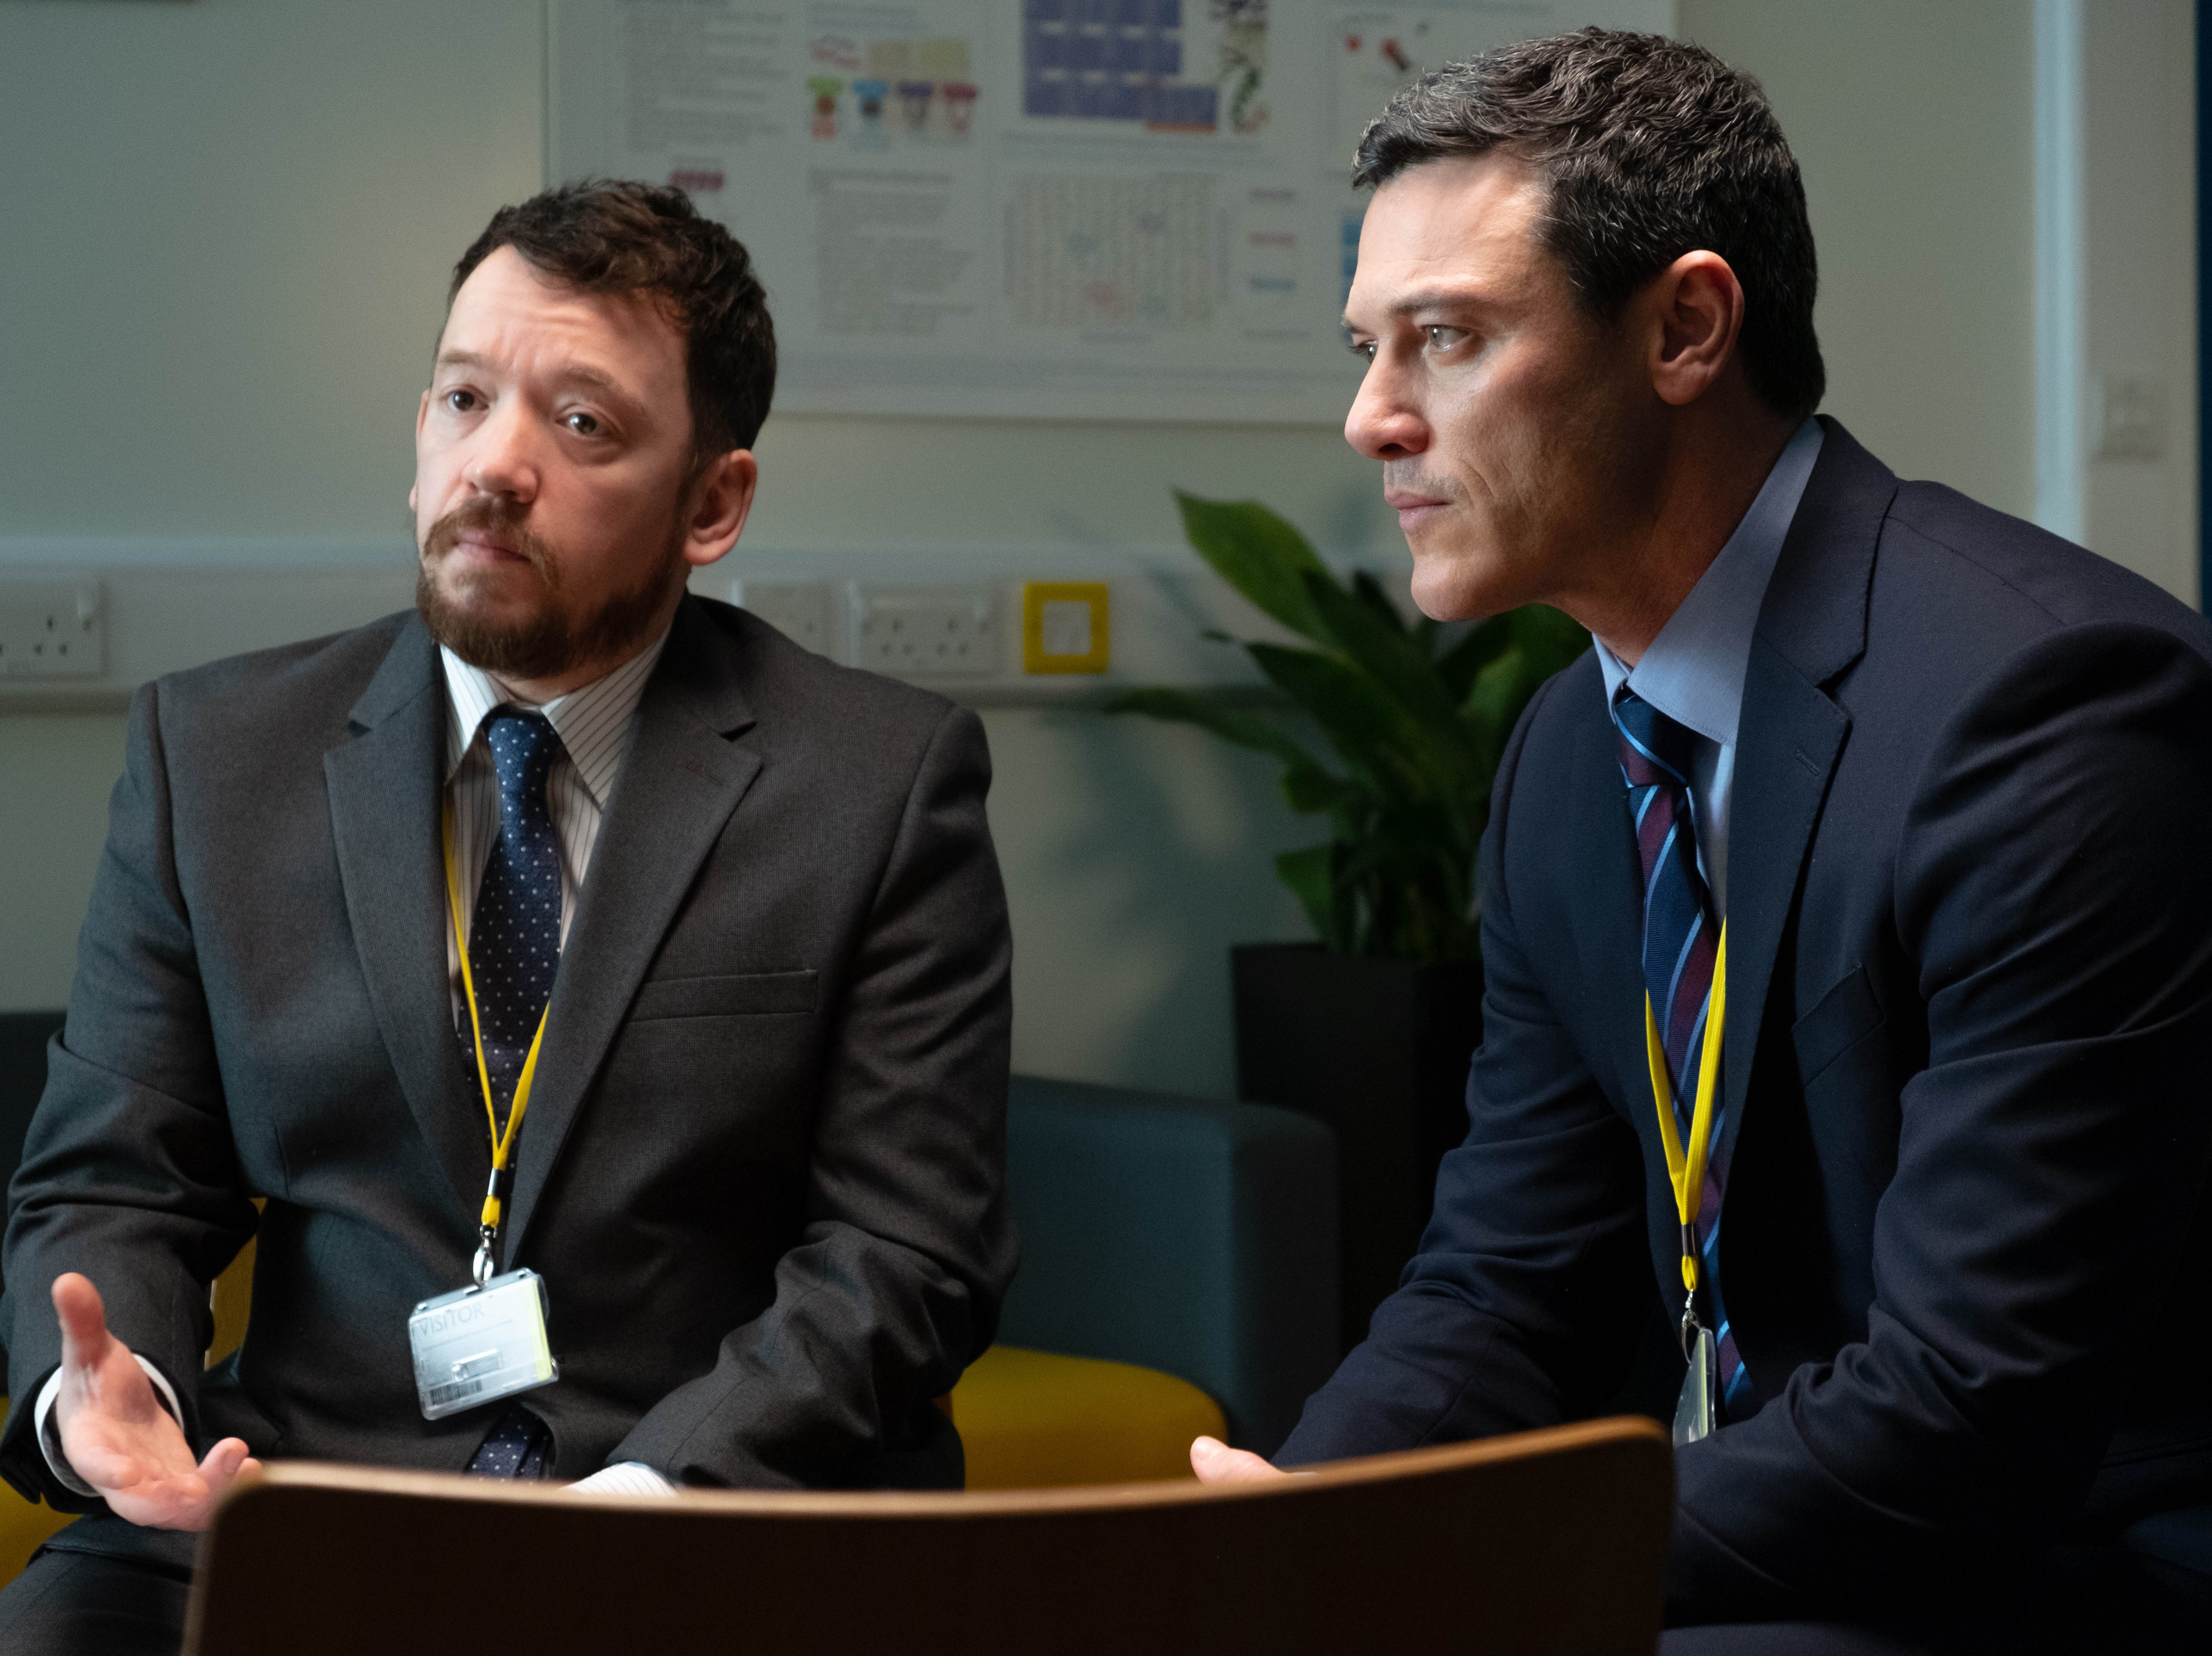 Doing some digging: Luke Evans (right) and Steve Meo as two investigators in ‘The Pembrokeshire Murders’